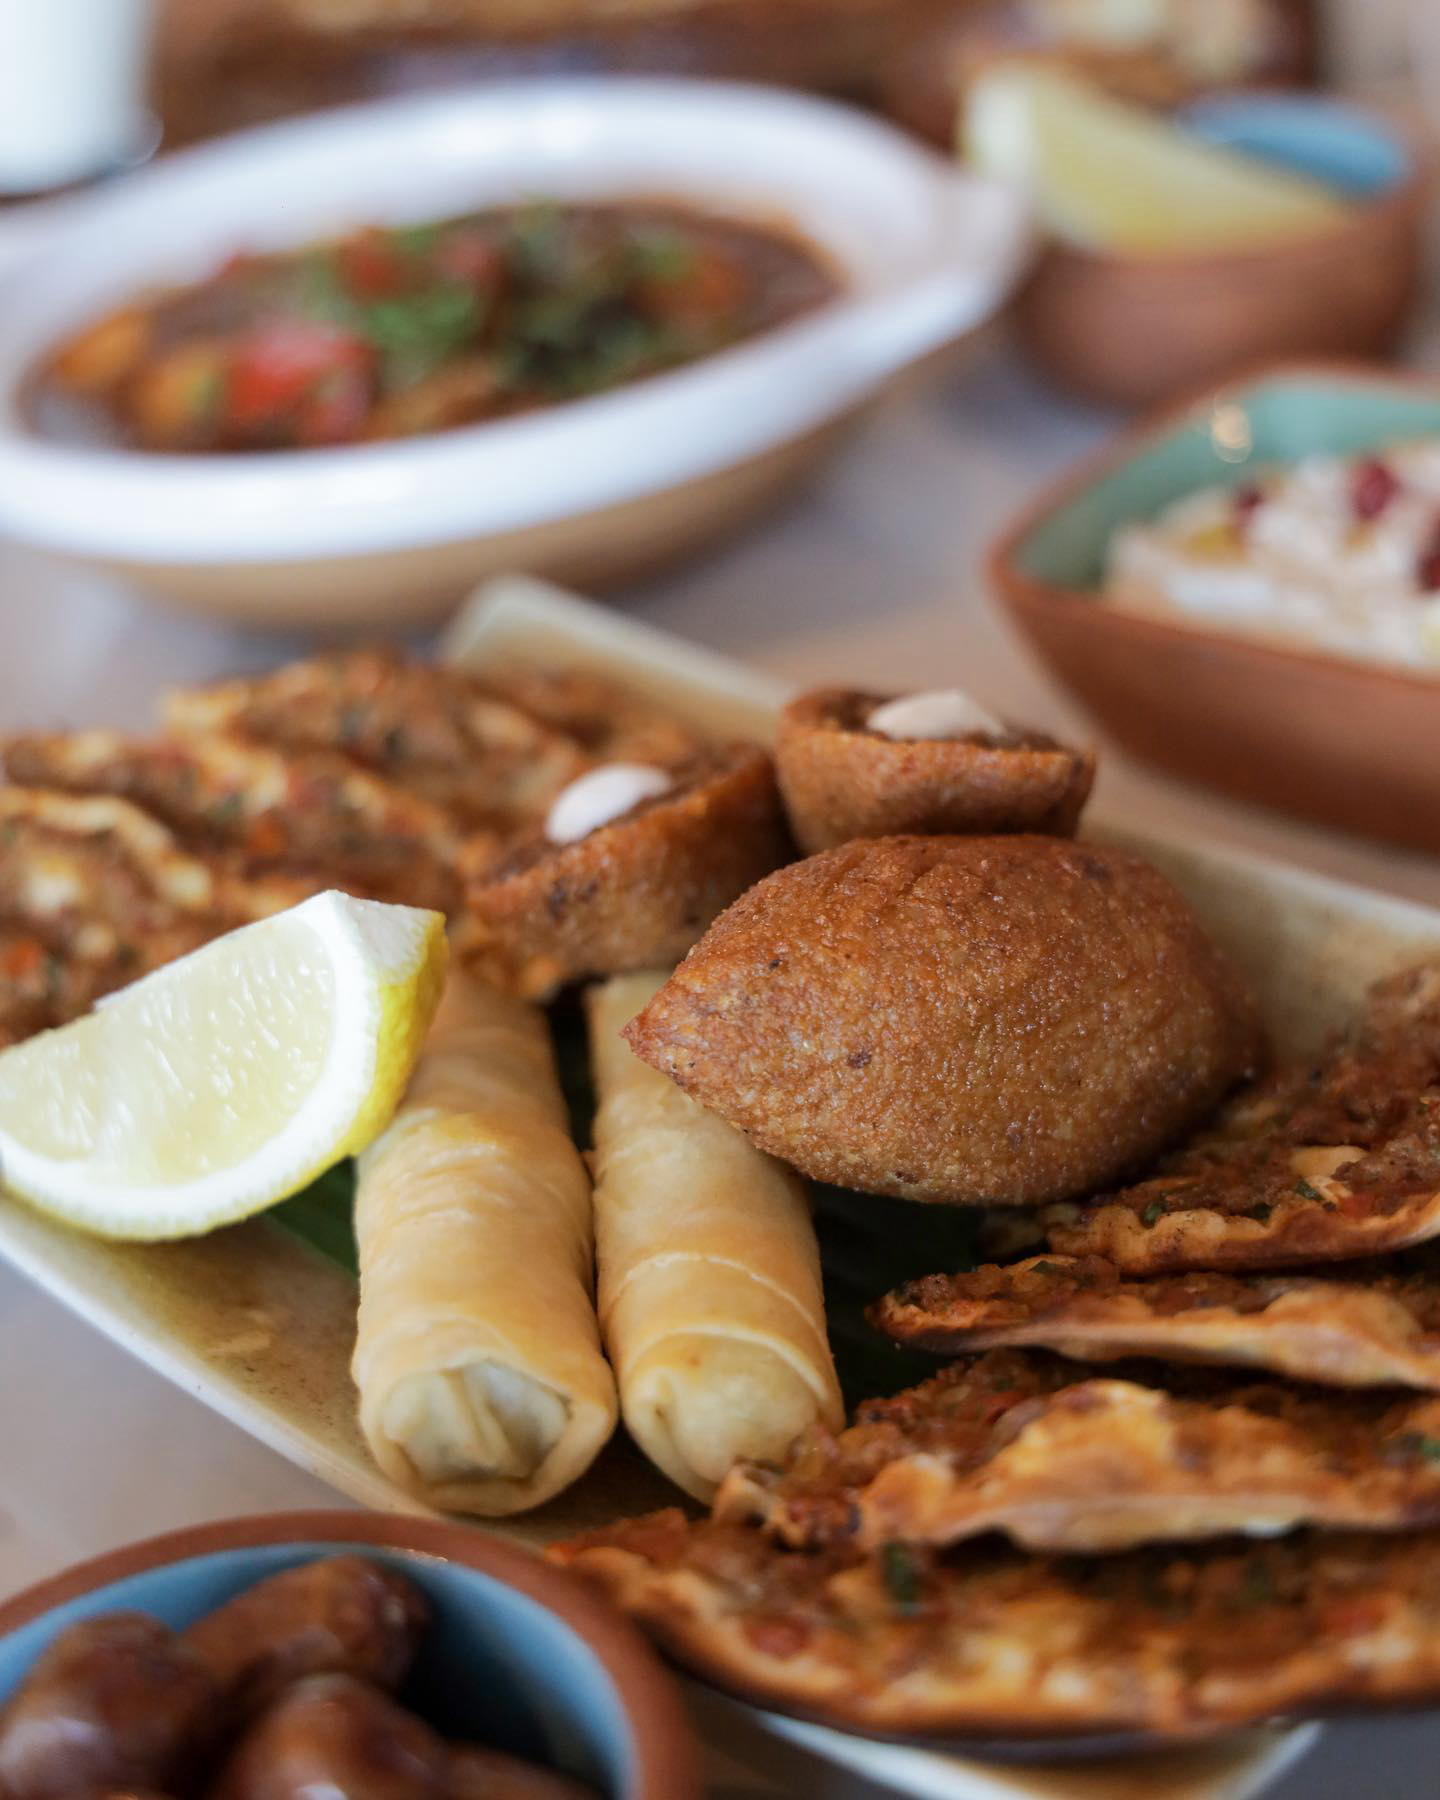 Enjoy our delicious Iftar set menu for only 99 aed per person